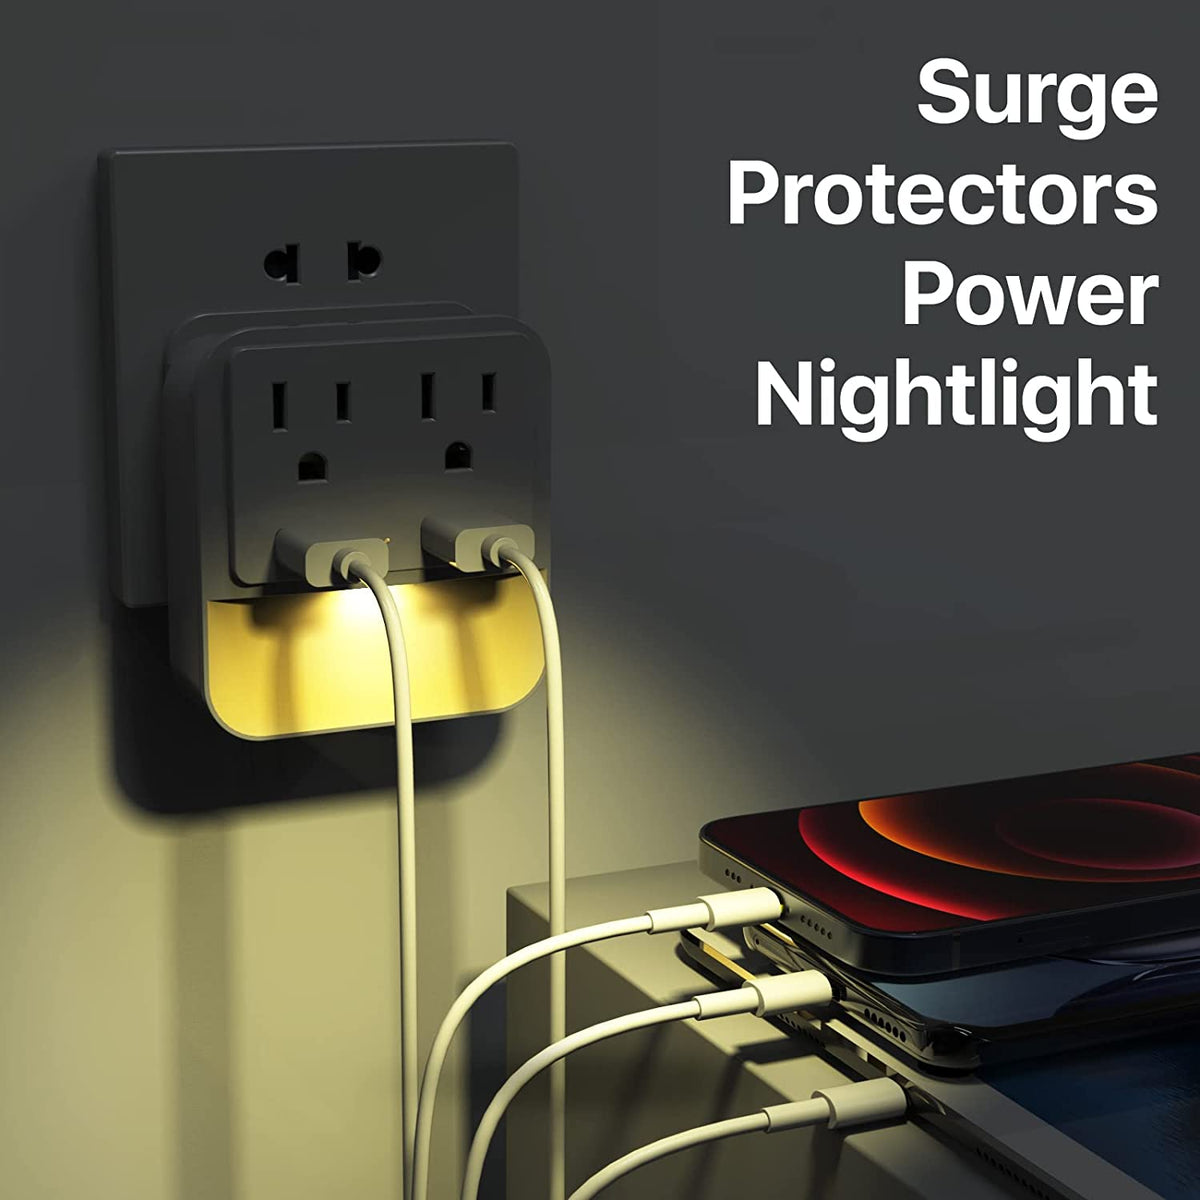 Multi-Plug Surge Protector Power Strip Wall Adapter - 2 Outlets with 2 USB Ports & Nightlight